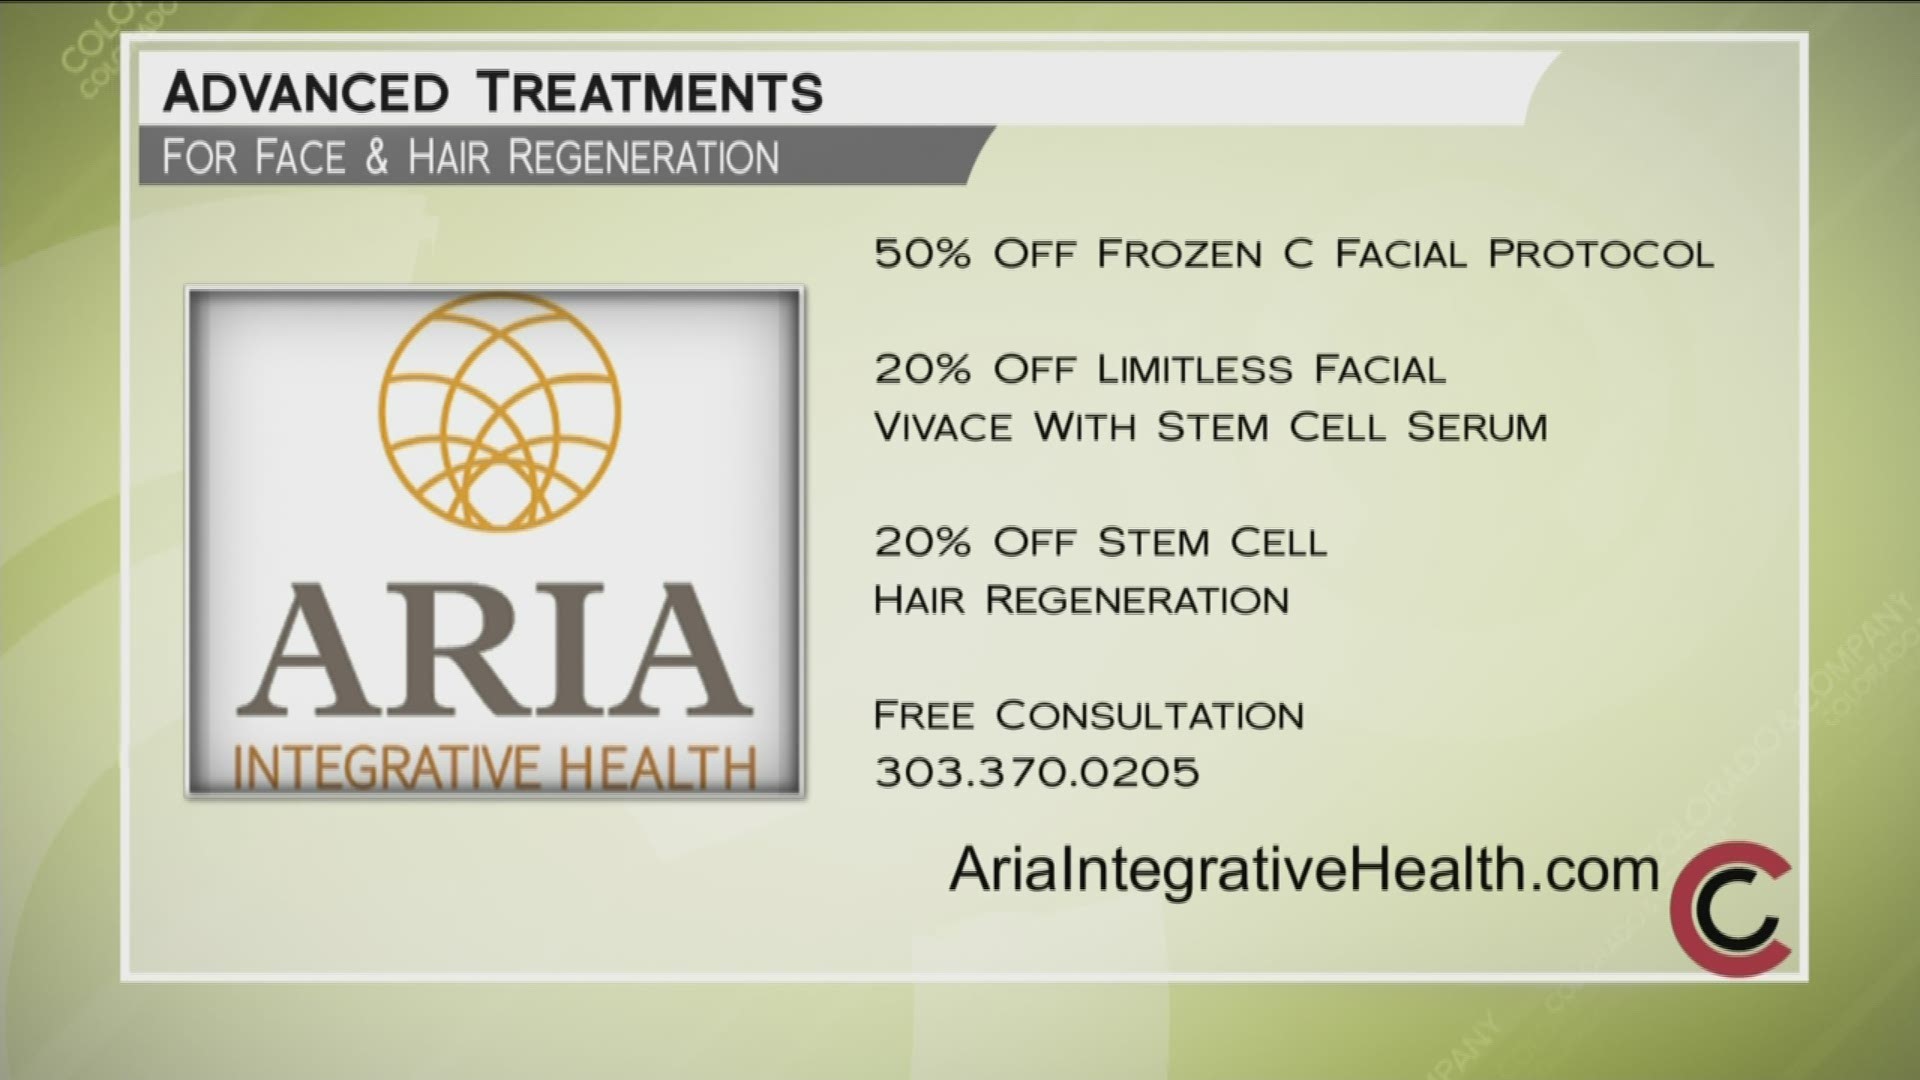 Aria Integrative Health has the most advanced stem cell treatments on the market! Look your best by calling 303.953.2899, or online at www.AriaIntegrativeHealth.com